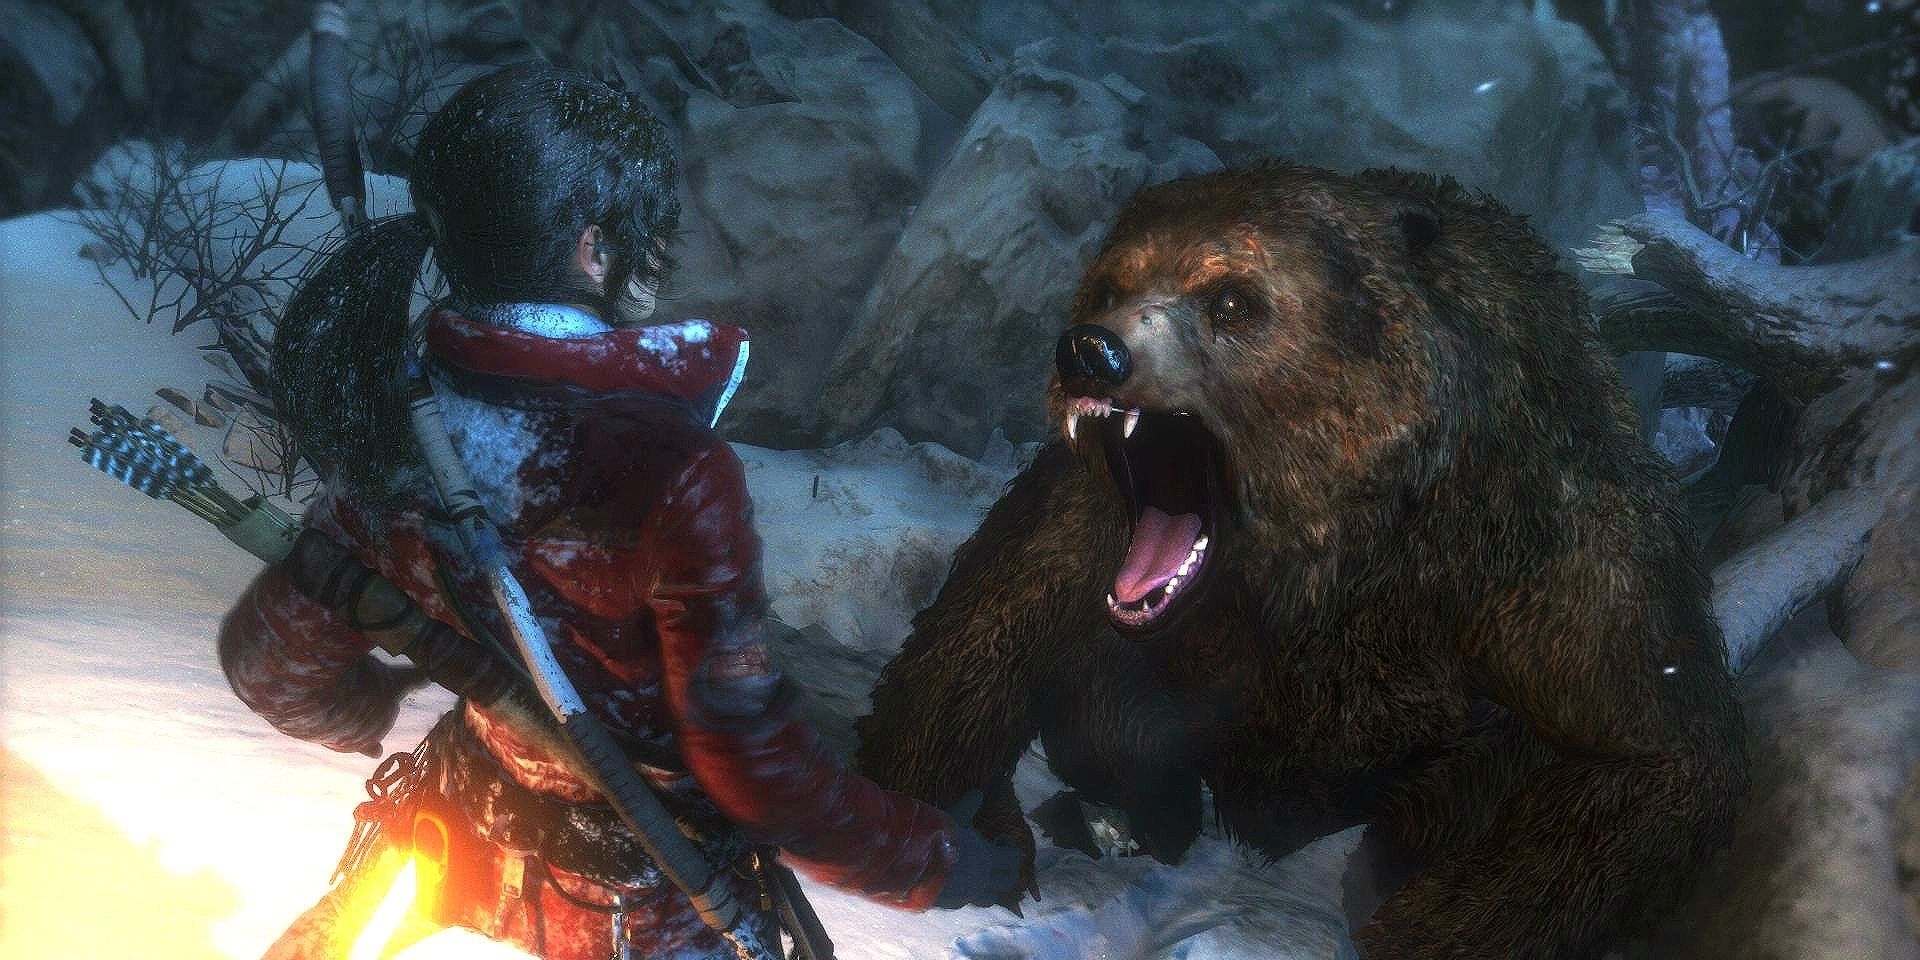 A screenshot showing Lara Croft being attacked by a bear in Rise of the Tomb Raider